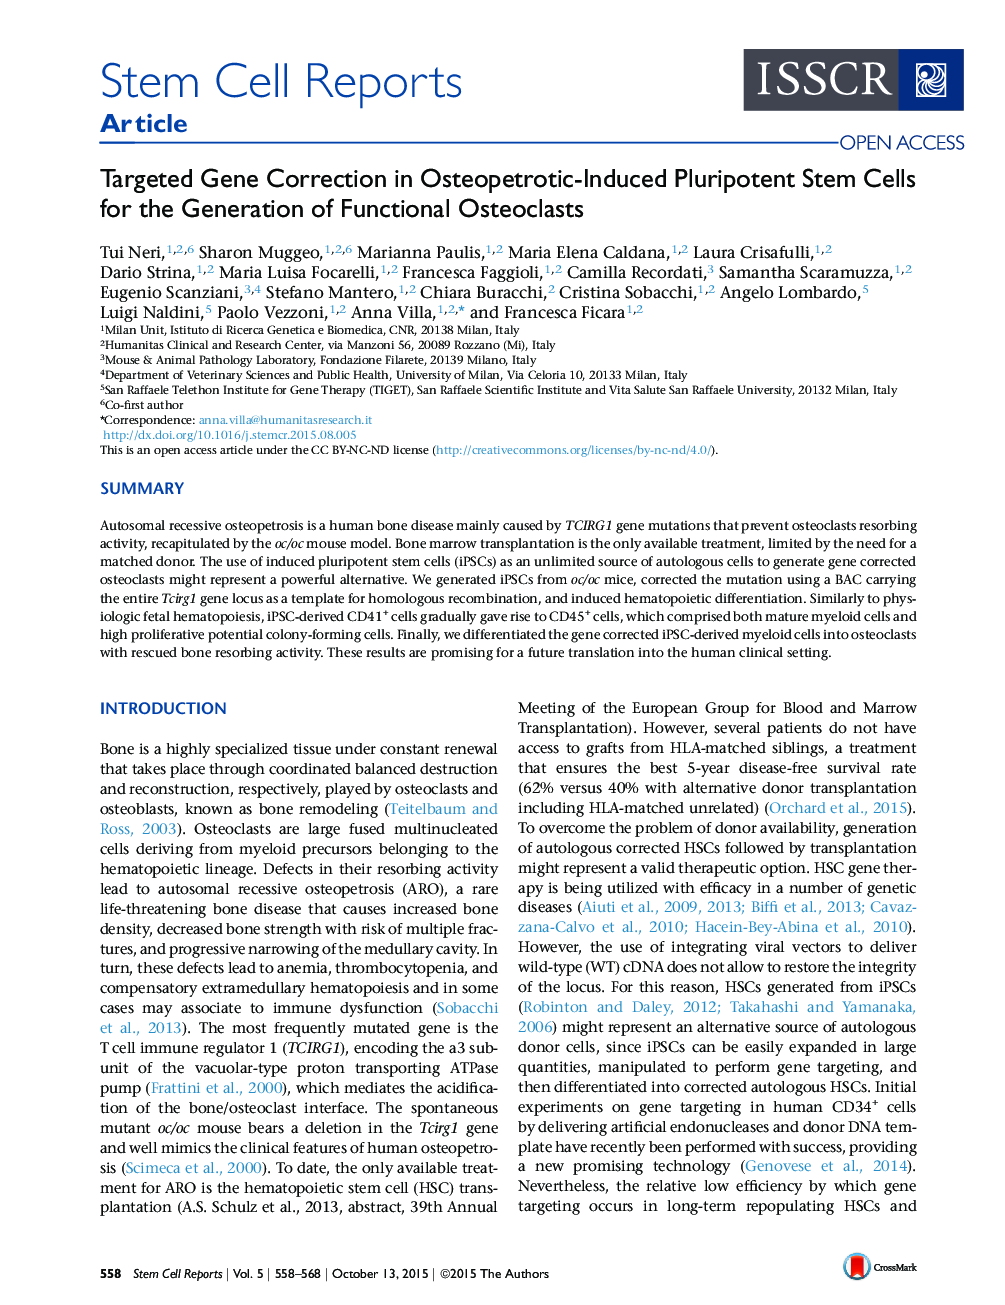 Targeted Gene Correction in Osteopetrotic-Induced Pluripotent Stem Cells for the Generation of Functional Osteoclasts 